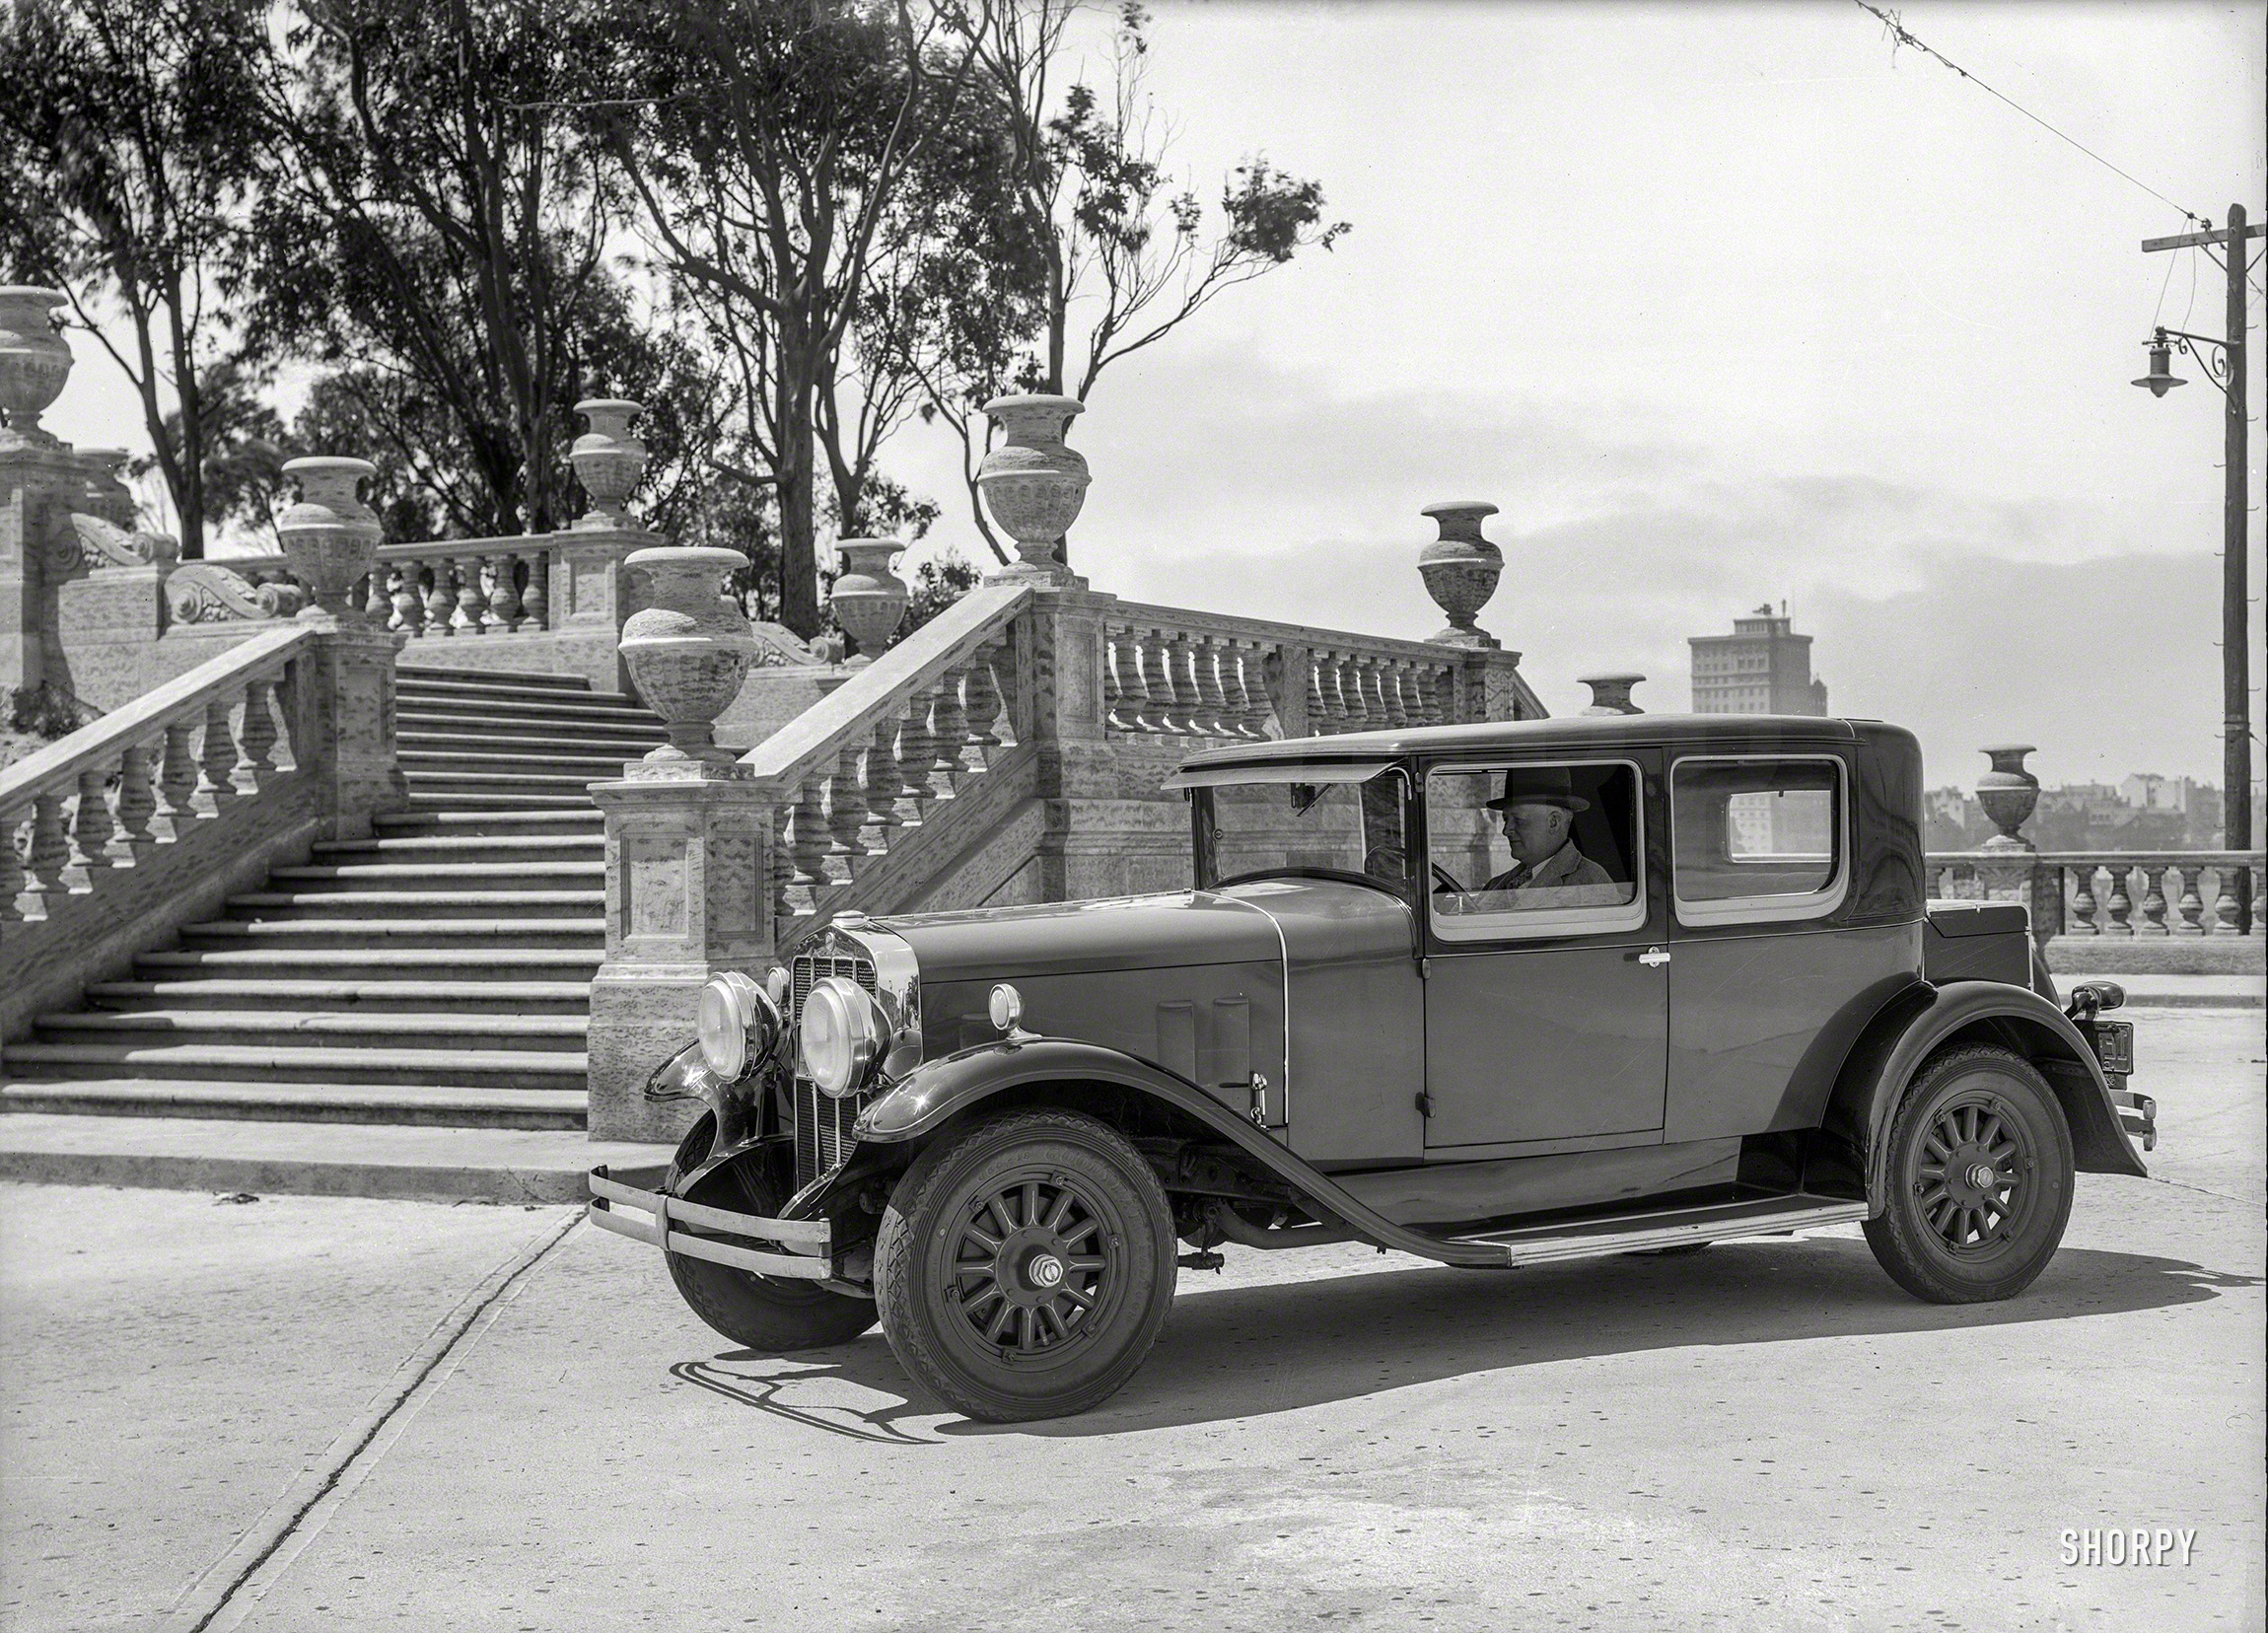 San Francisco, 1929. "Franklin sedan at Pioneer Park, Telegraph Hill." The view-blocking "funeral urn" balustrade, like the Franklin, proved unpopular with motorists and soon vanished. 5x7 glass negative by Chris Helin. View full size.